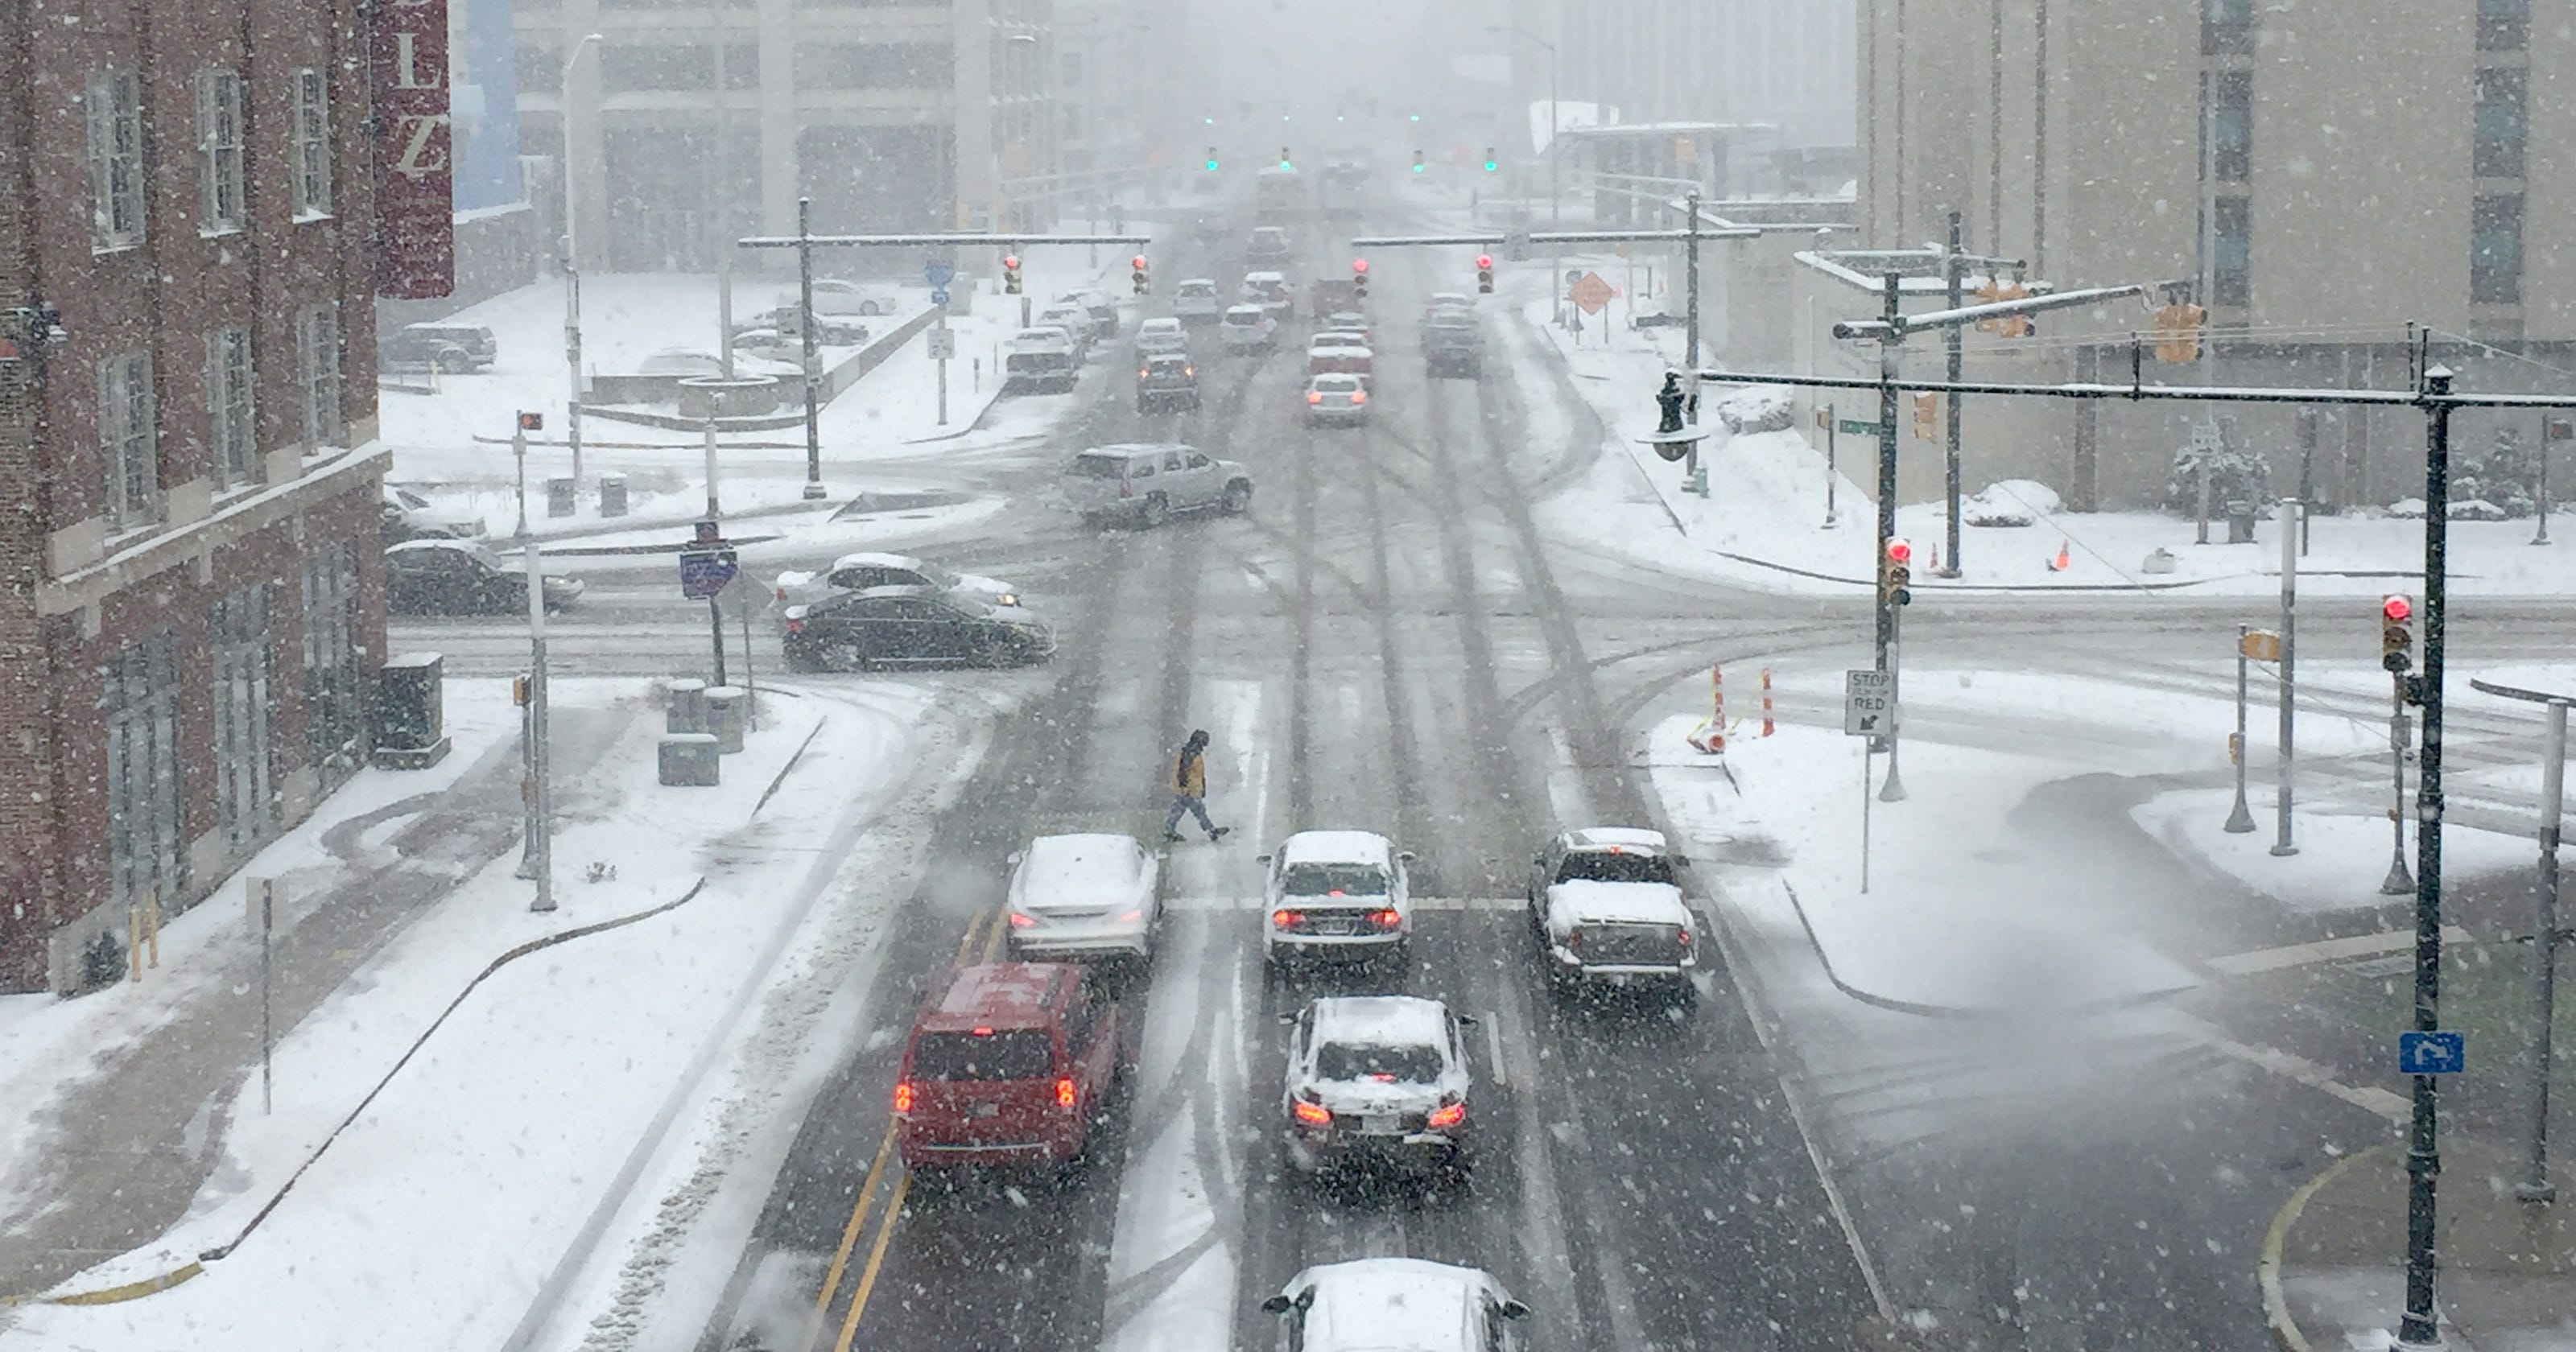 No joke: Indianapolis could get snow on April Fools Day